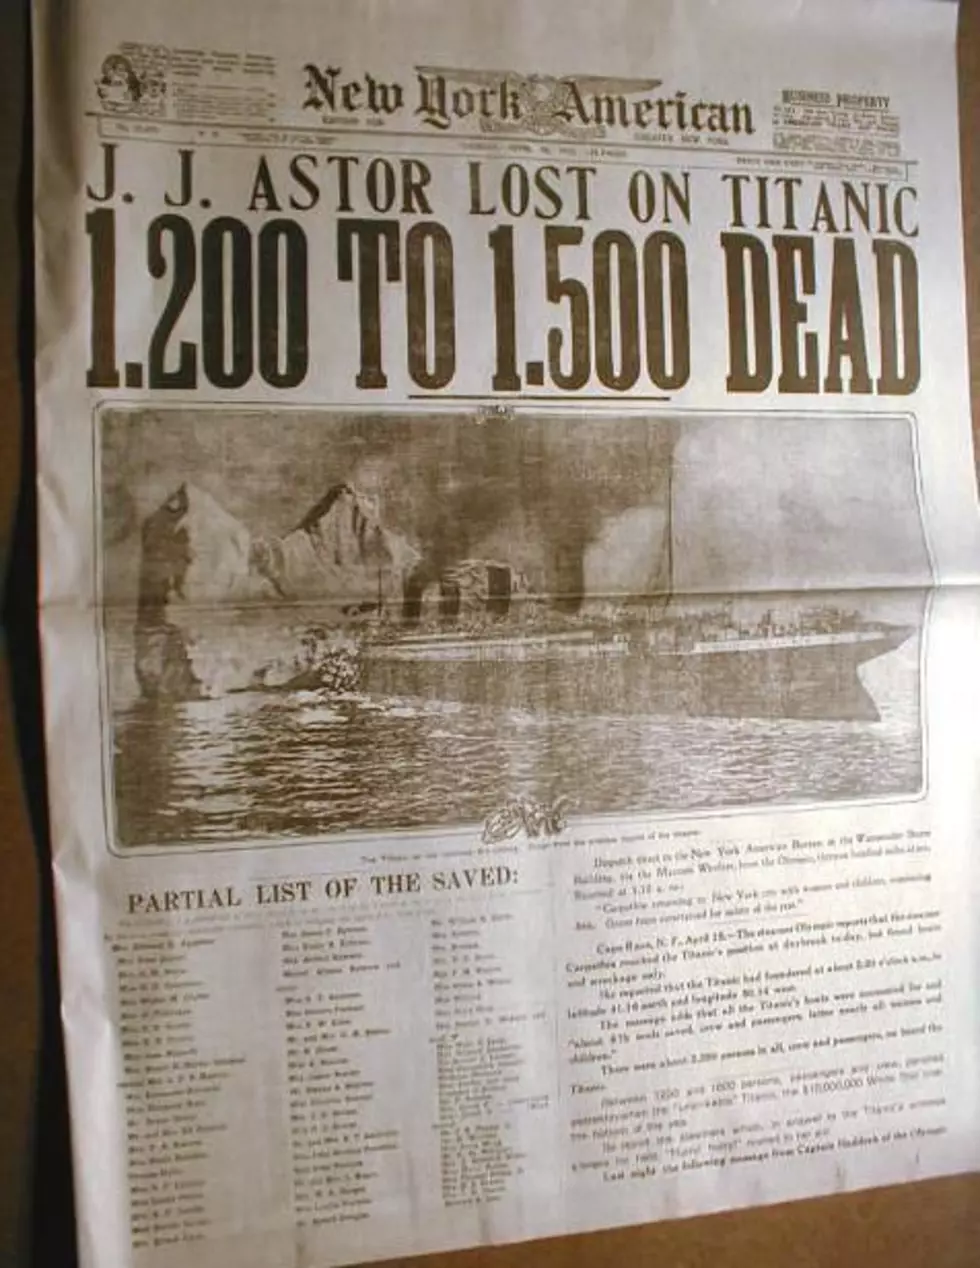 Titanic Disaster Subject of Talk at Sidney Library